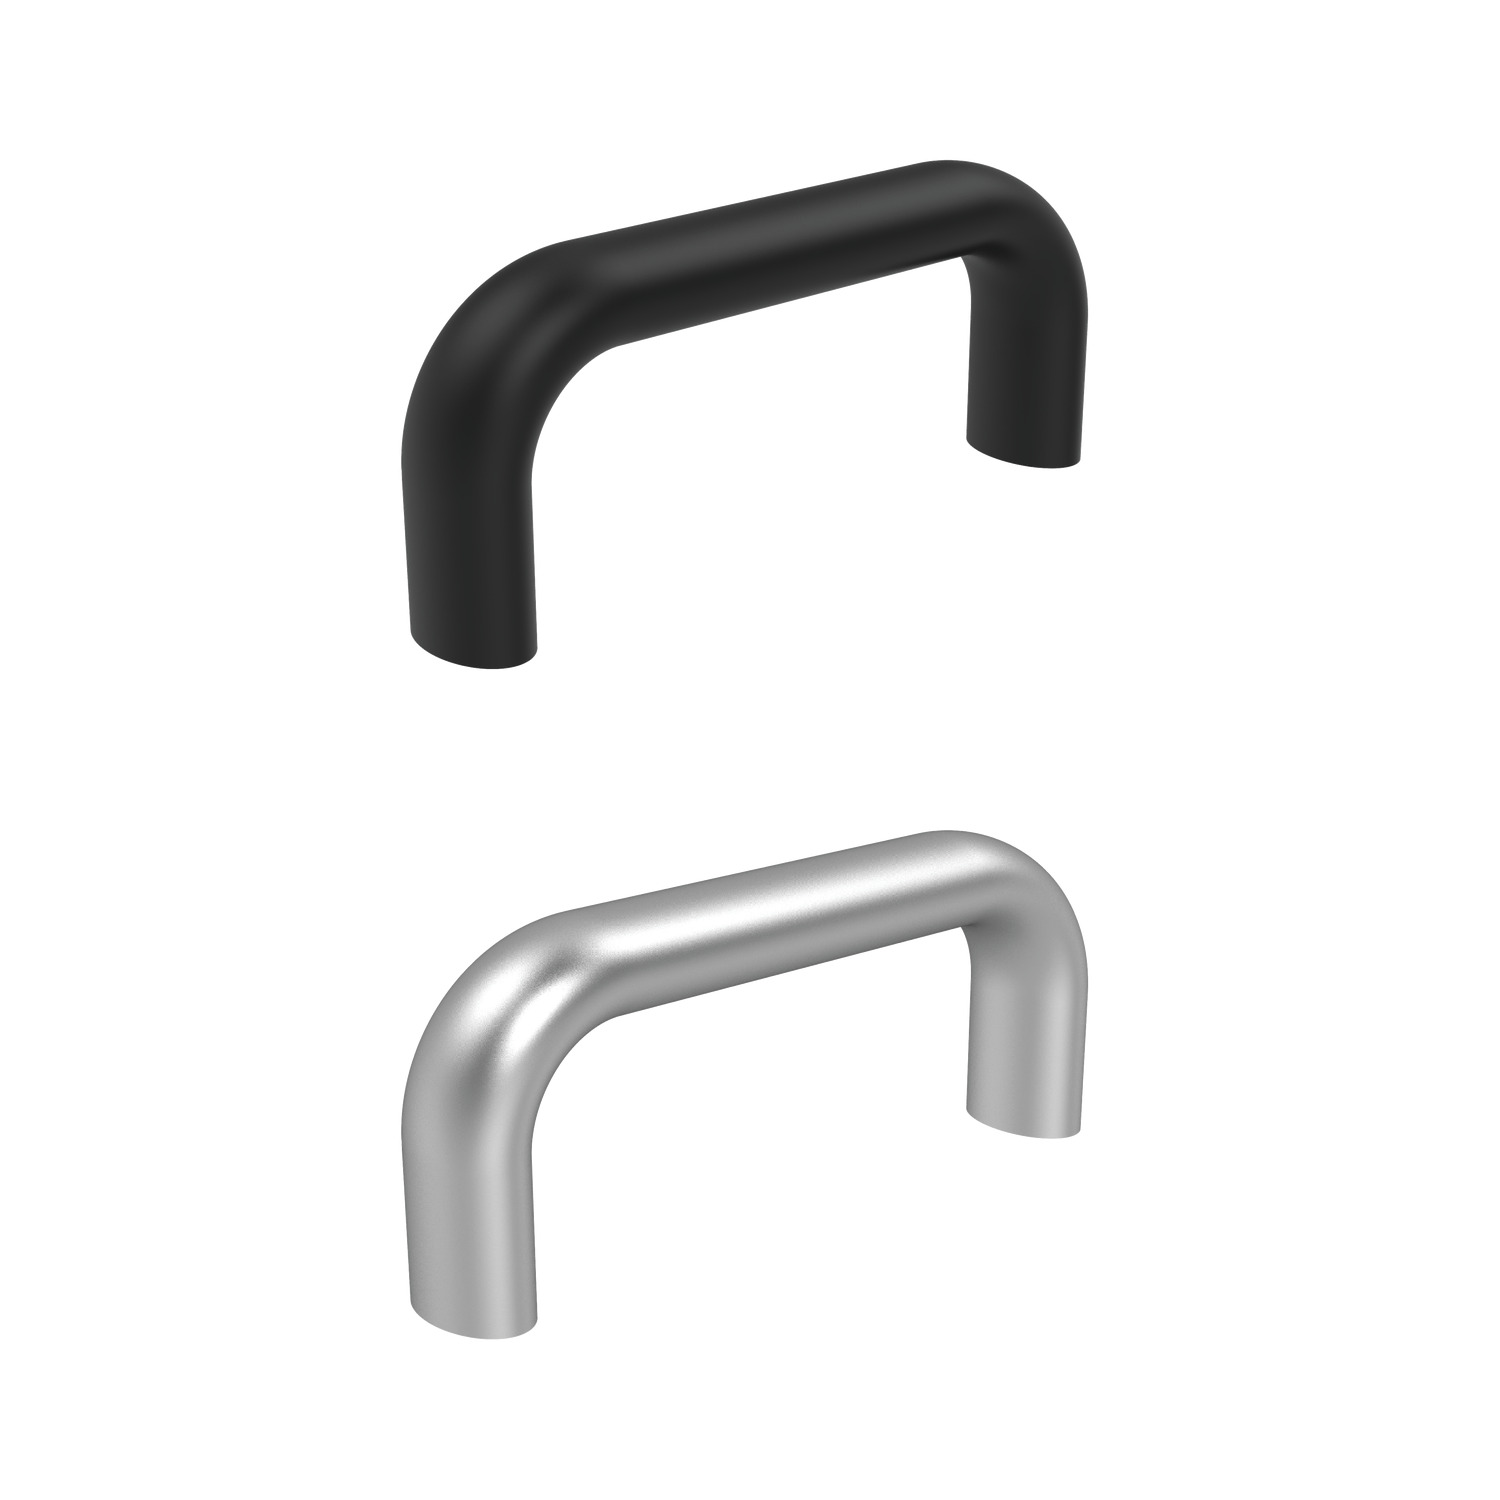 Cabinet Handles Our aluminium cabinet handles and rear mounting and the design offers high stability and smooth surfaces. Available in a natural silver or black plastic coated.